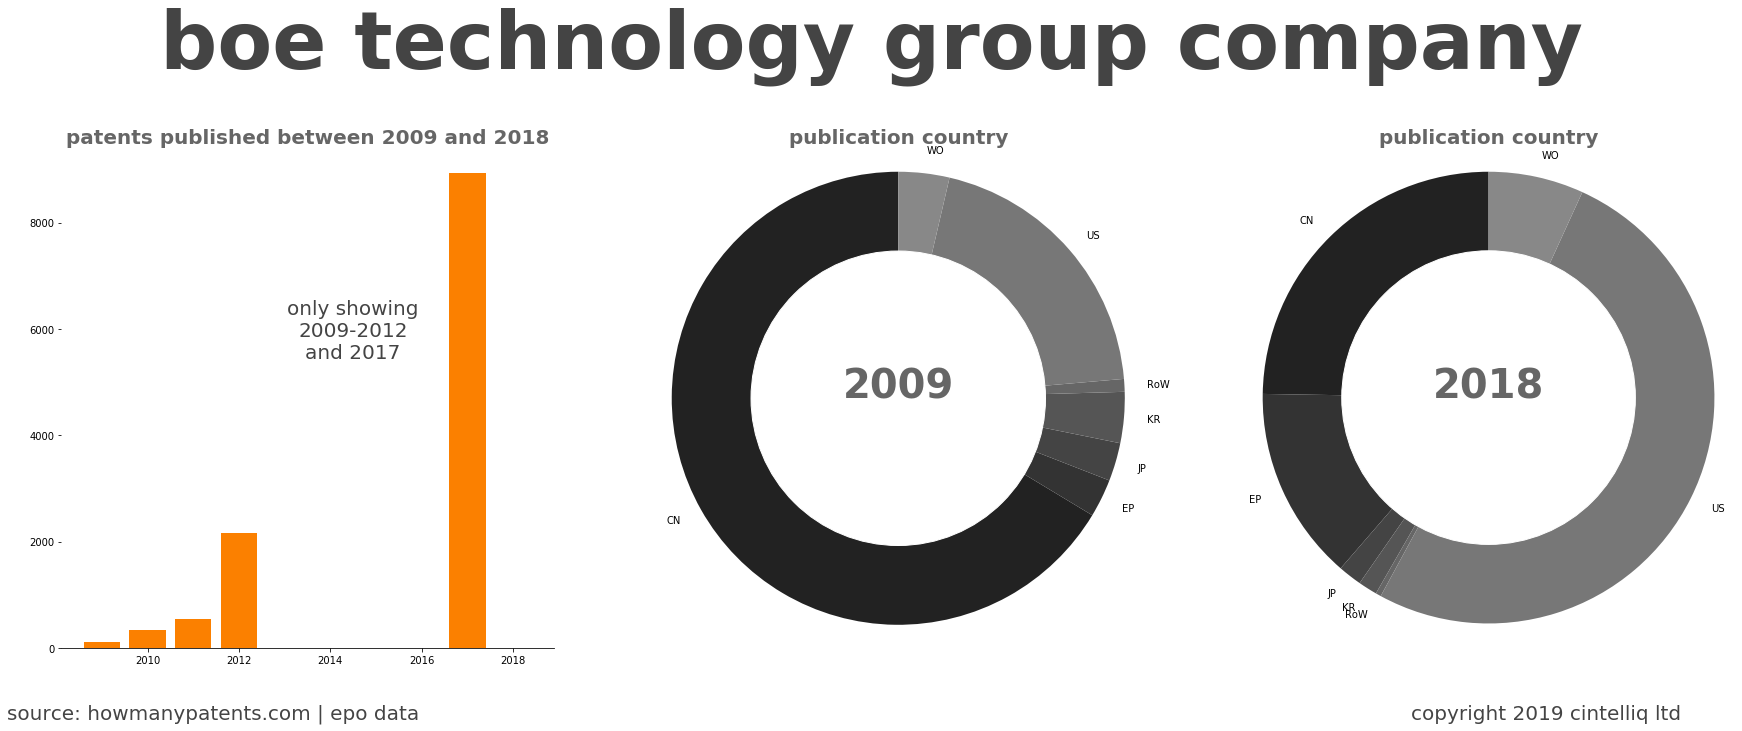 summary of patents for Boe Technology Group Company